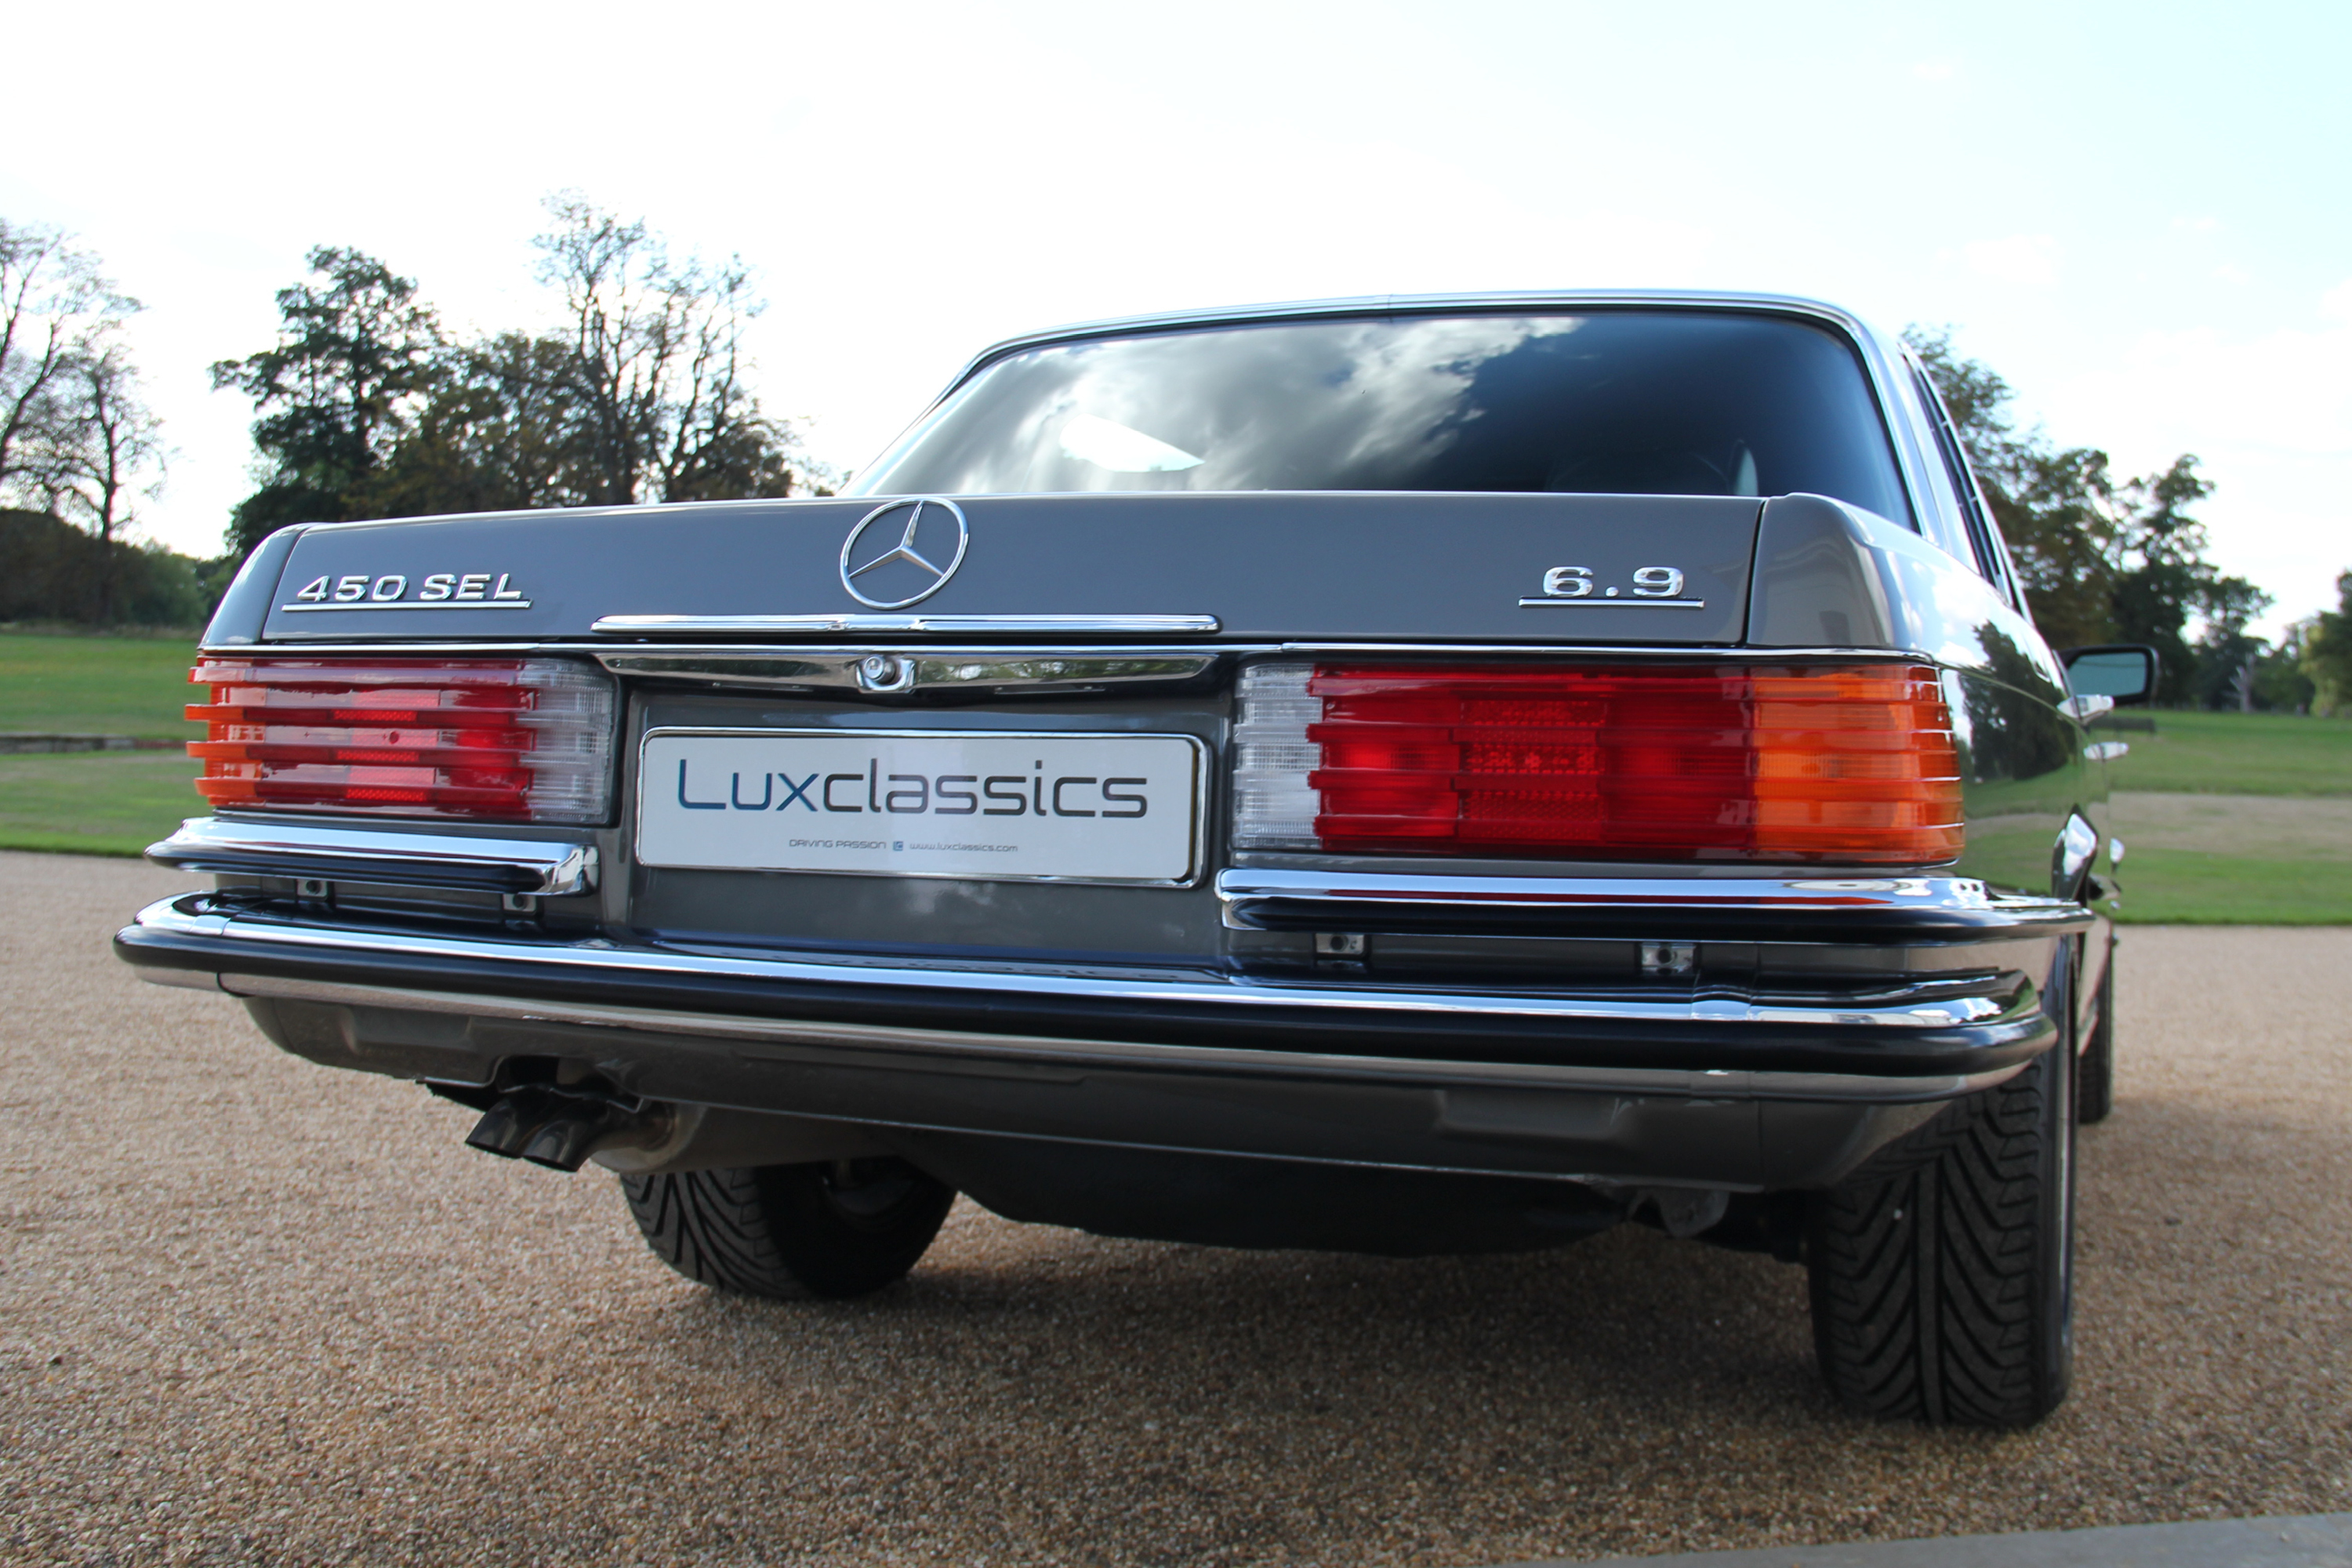 Used 1980 Mercedes Benz 450sel 6 9 Saloon Saloon 6 9 Automatic Petrol For Sale In Essex U84 Lux Classics